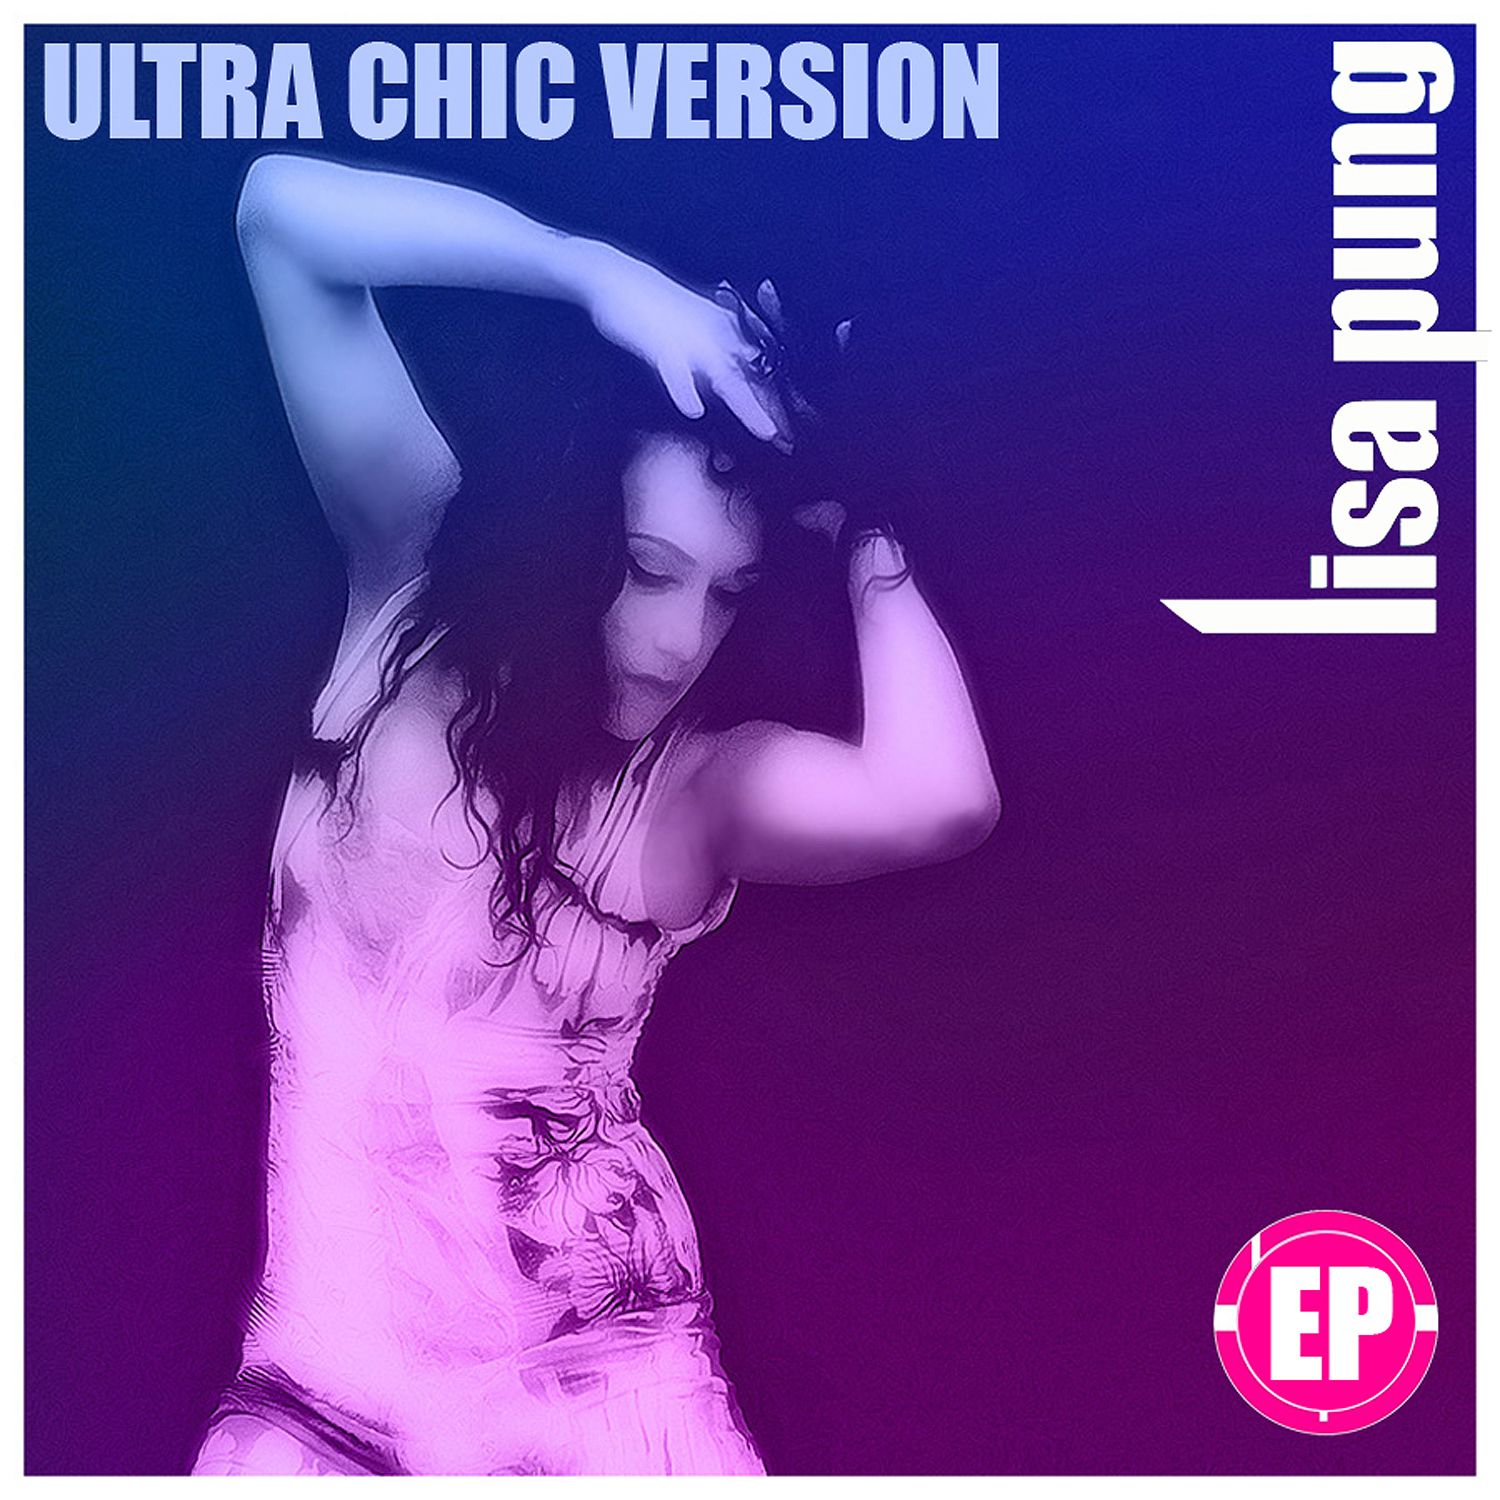 LISA PUNG Do Synth-Dreaming in New Release ‘ULTRA CHIC VERSION’